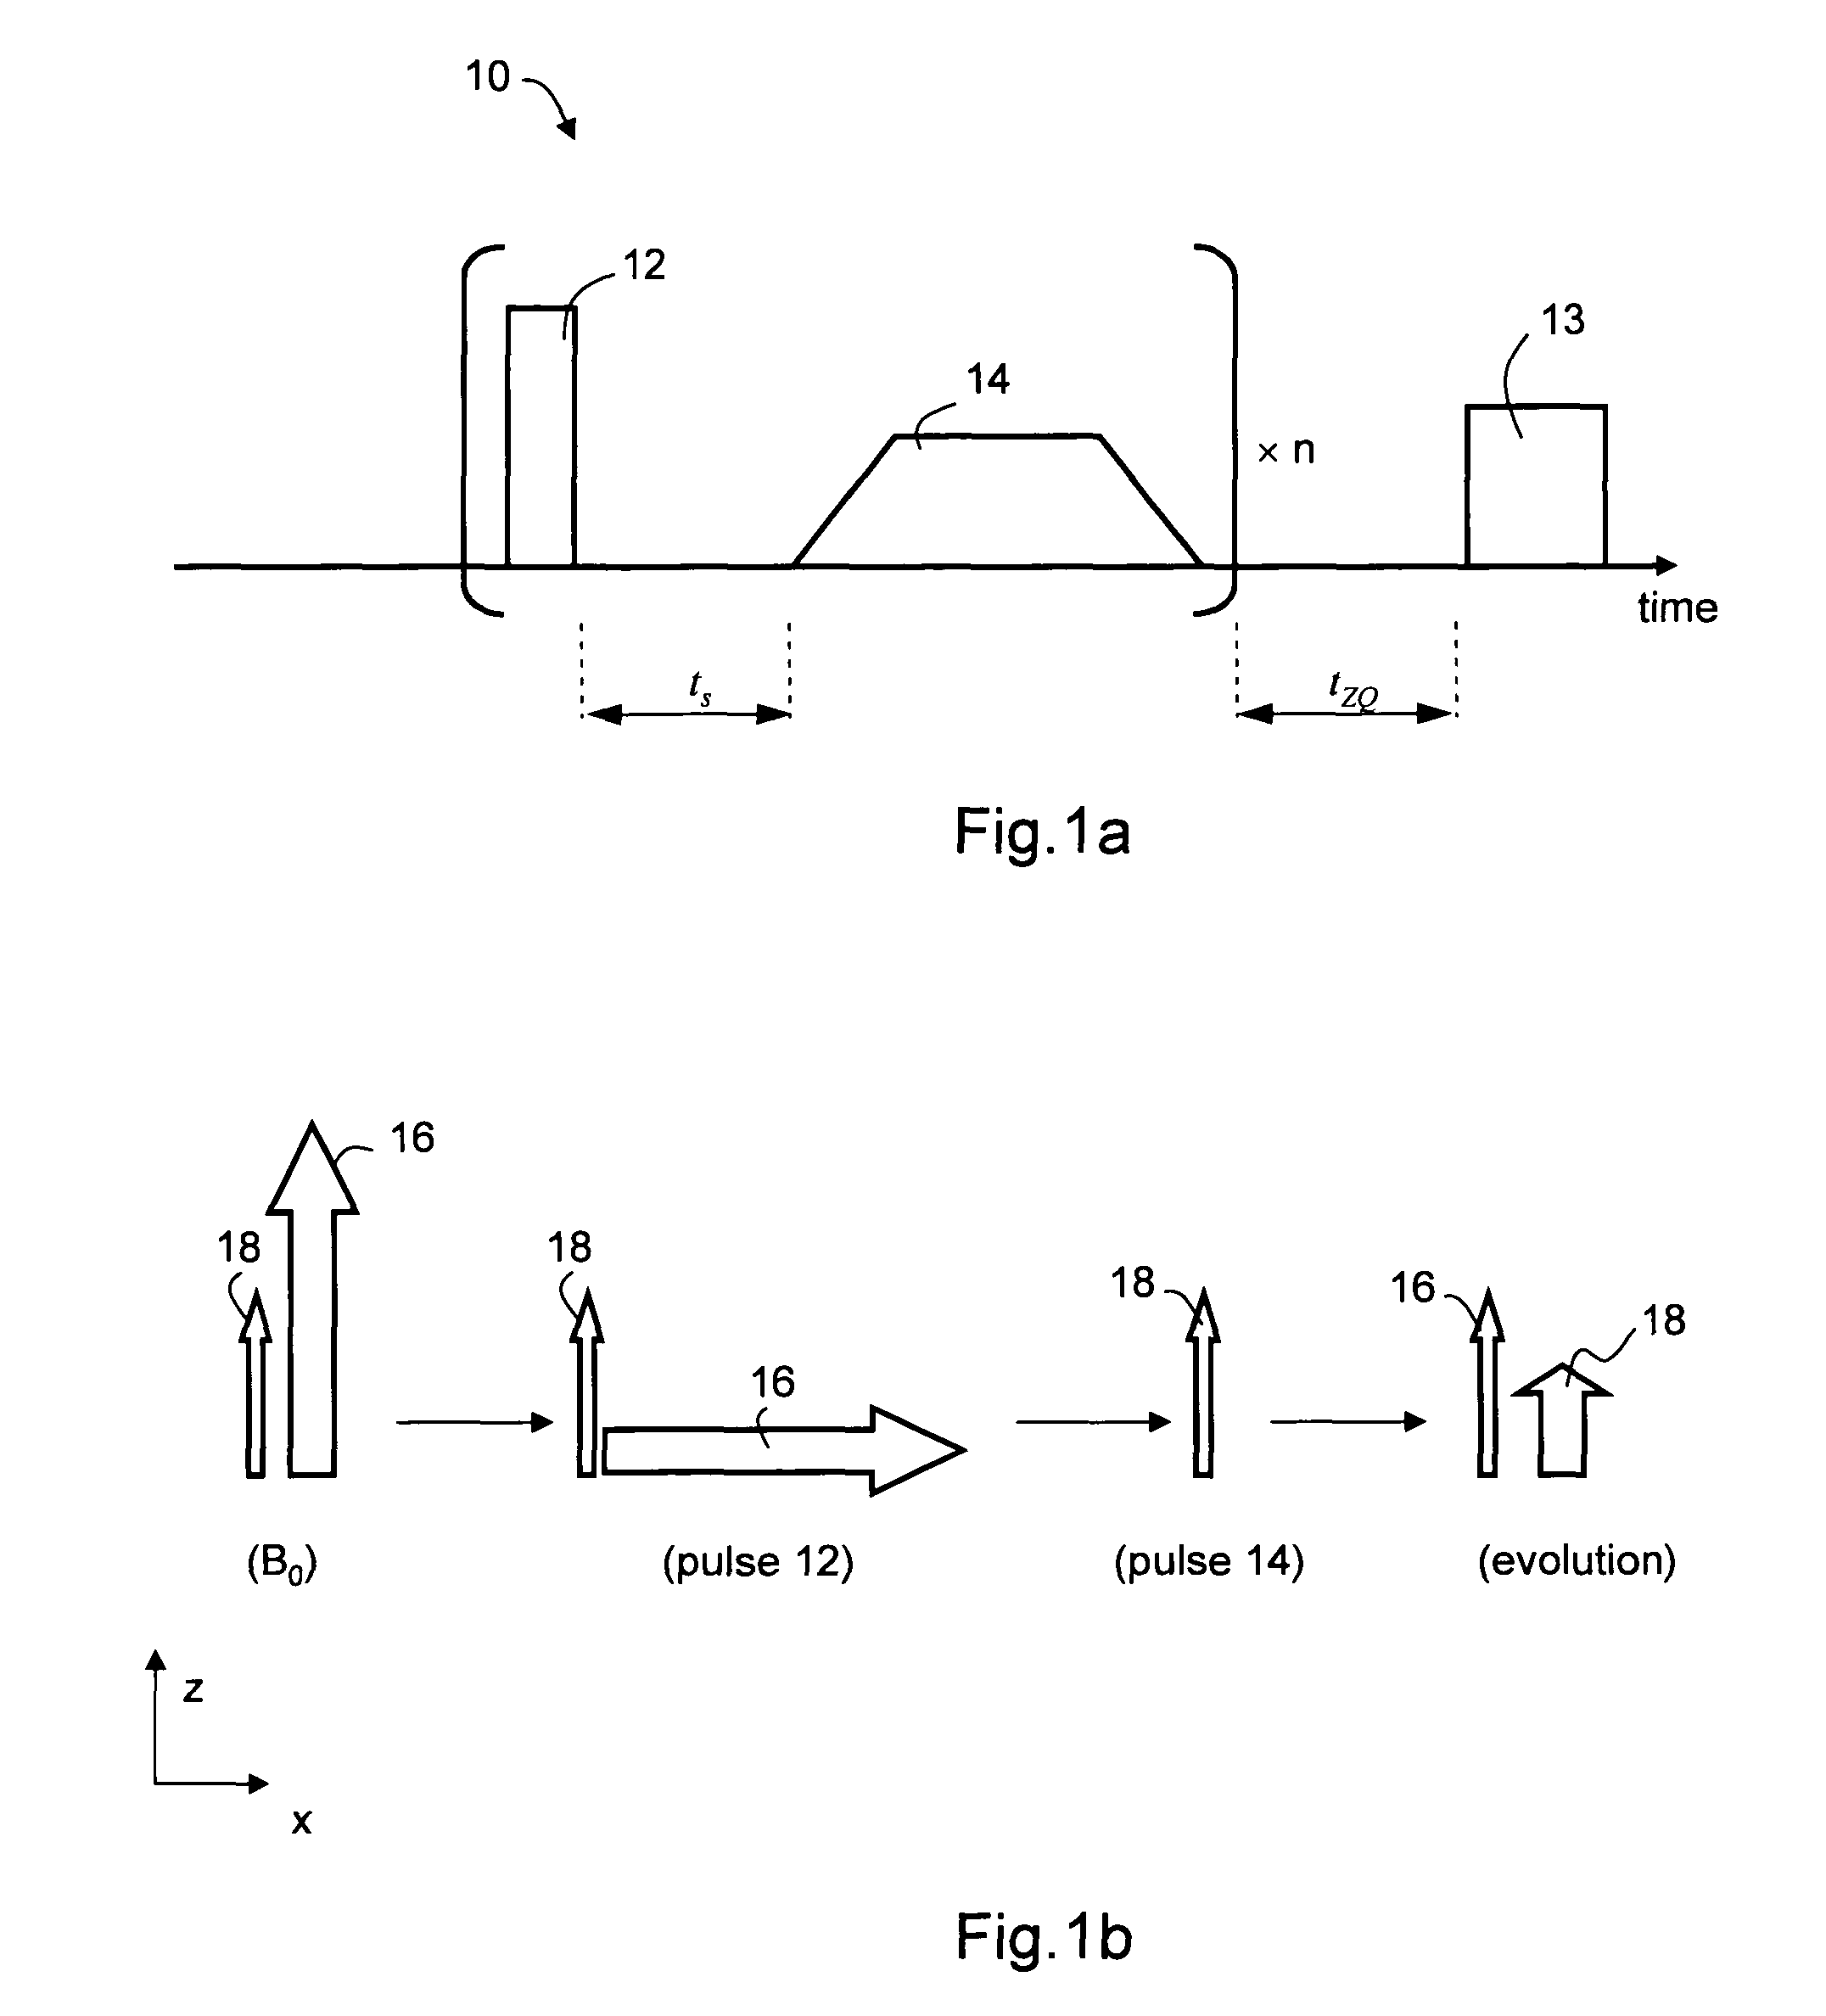 Method, apparatus and system for magnetic resonance analysis based on water magnetization transferred from other molecules